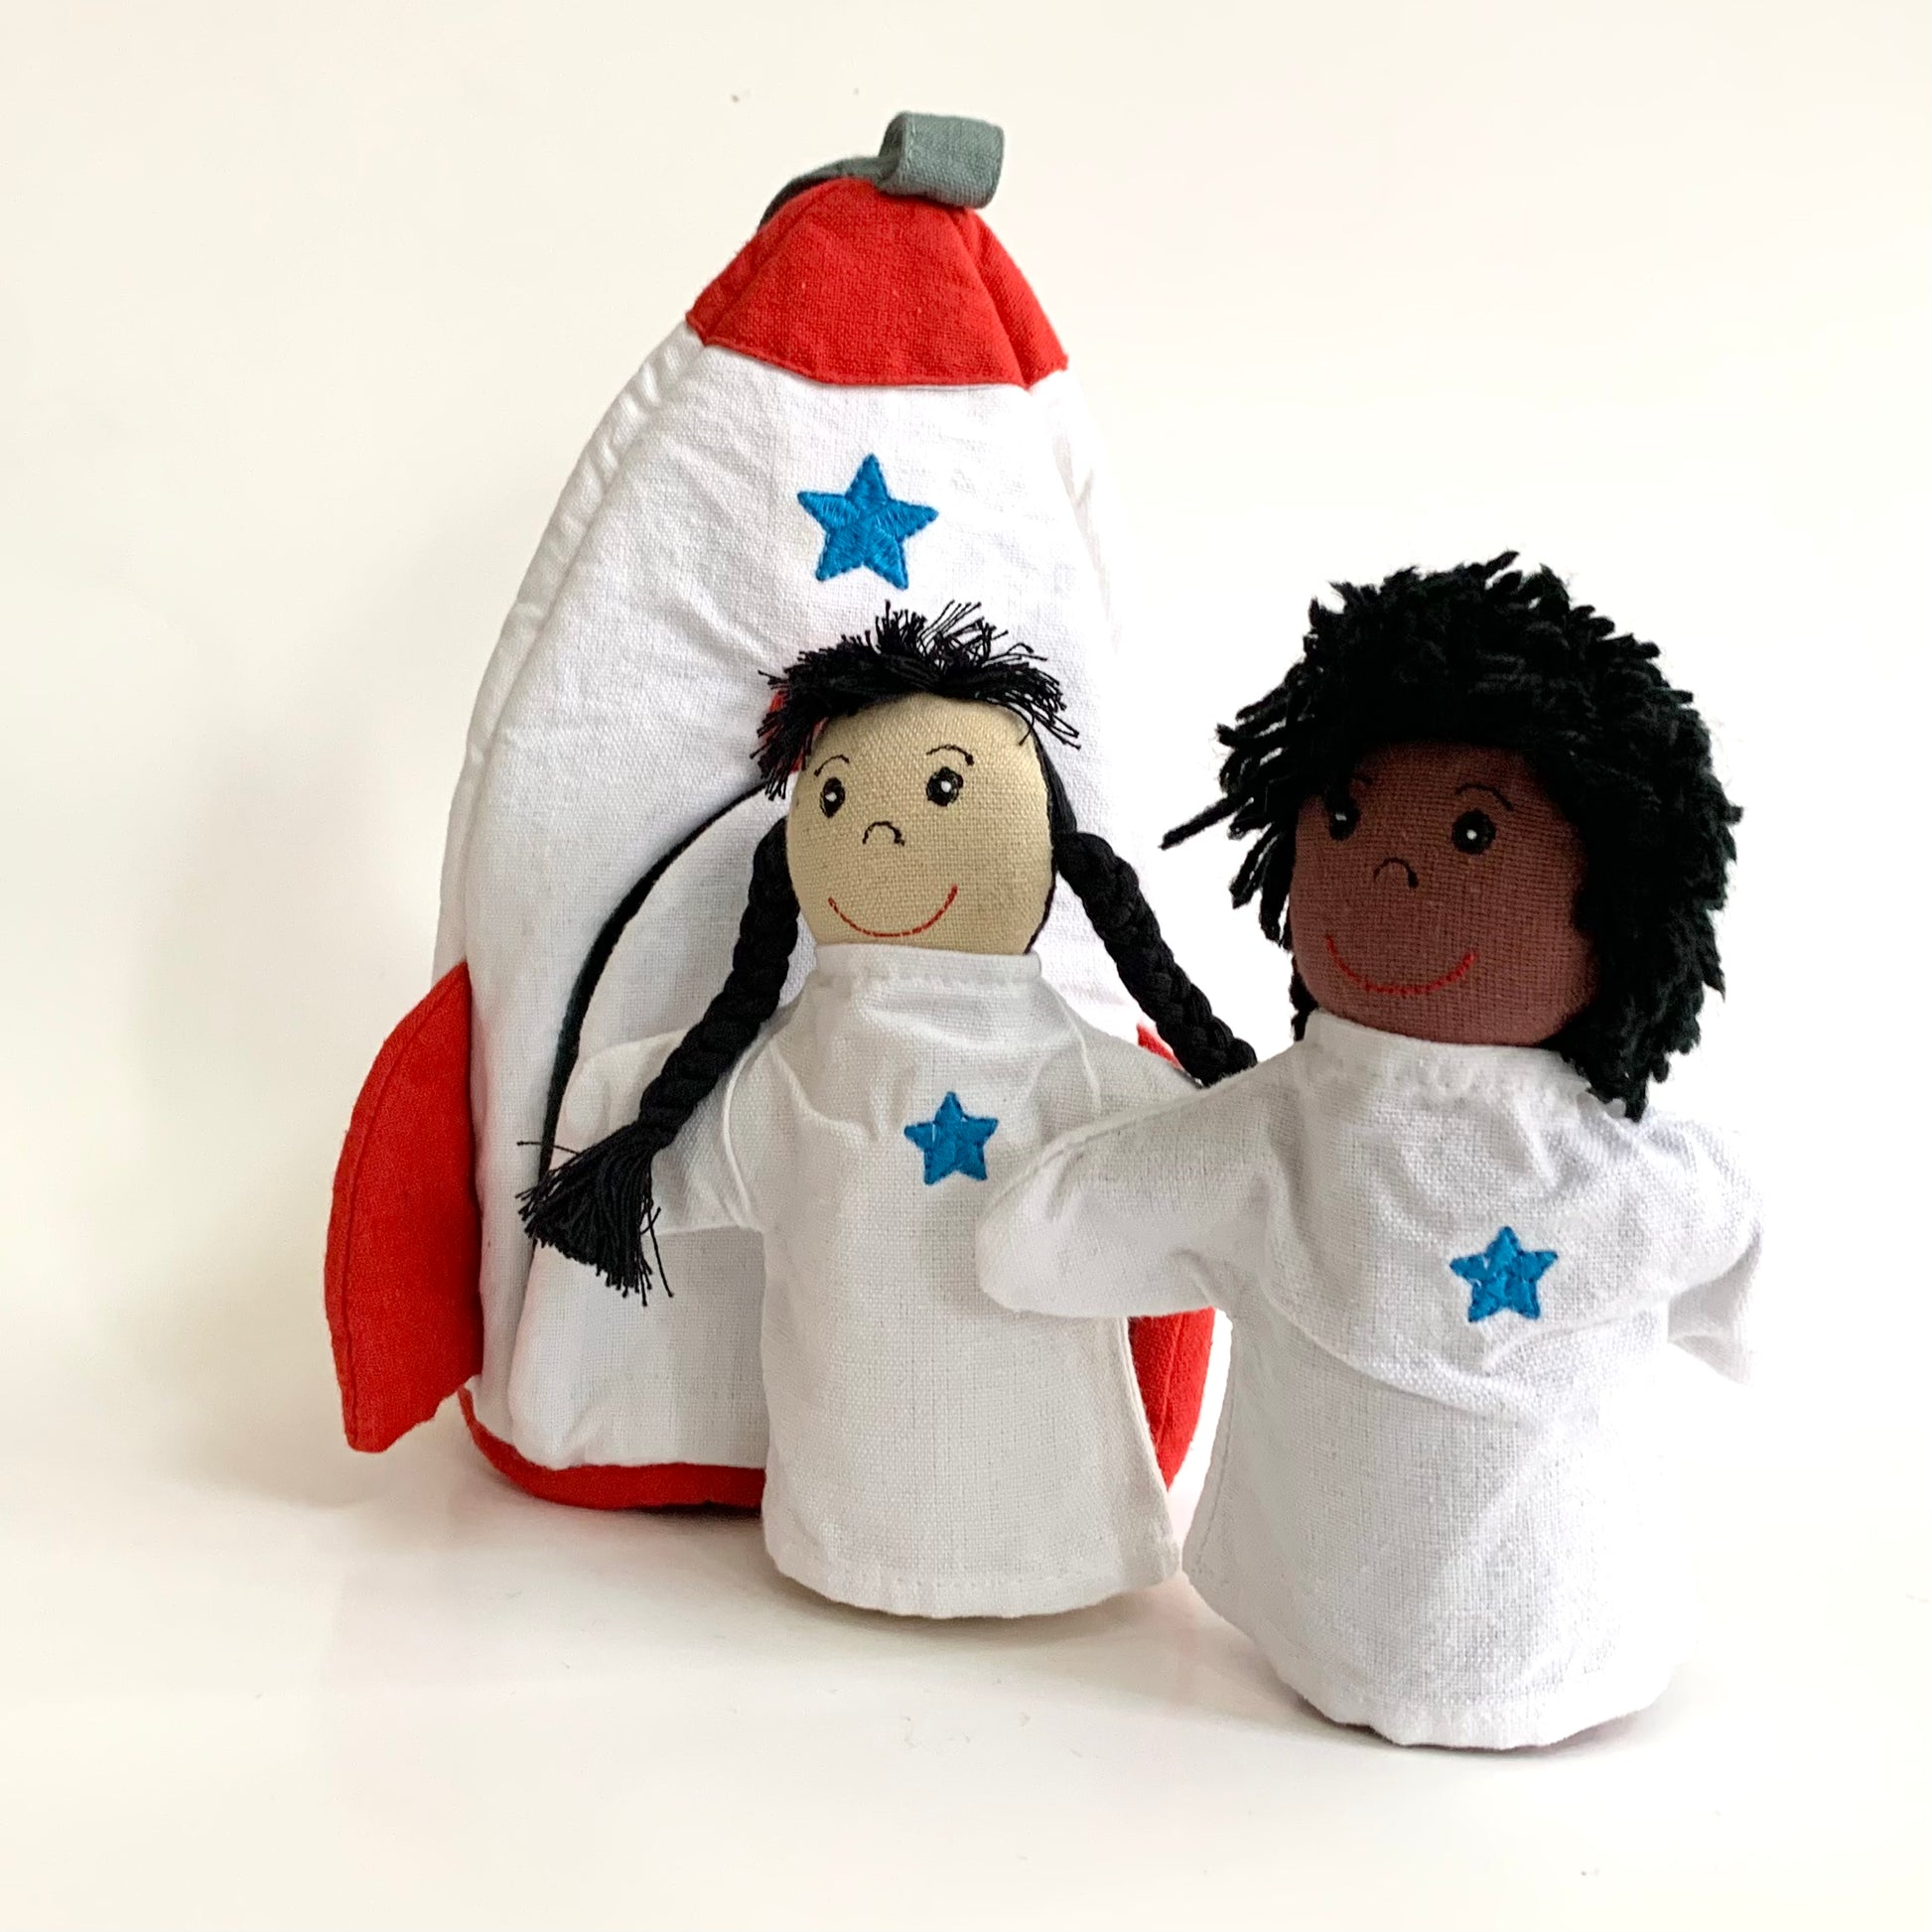 Rocket ship toy and dolls